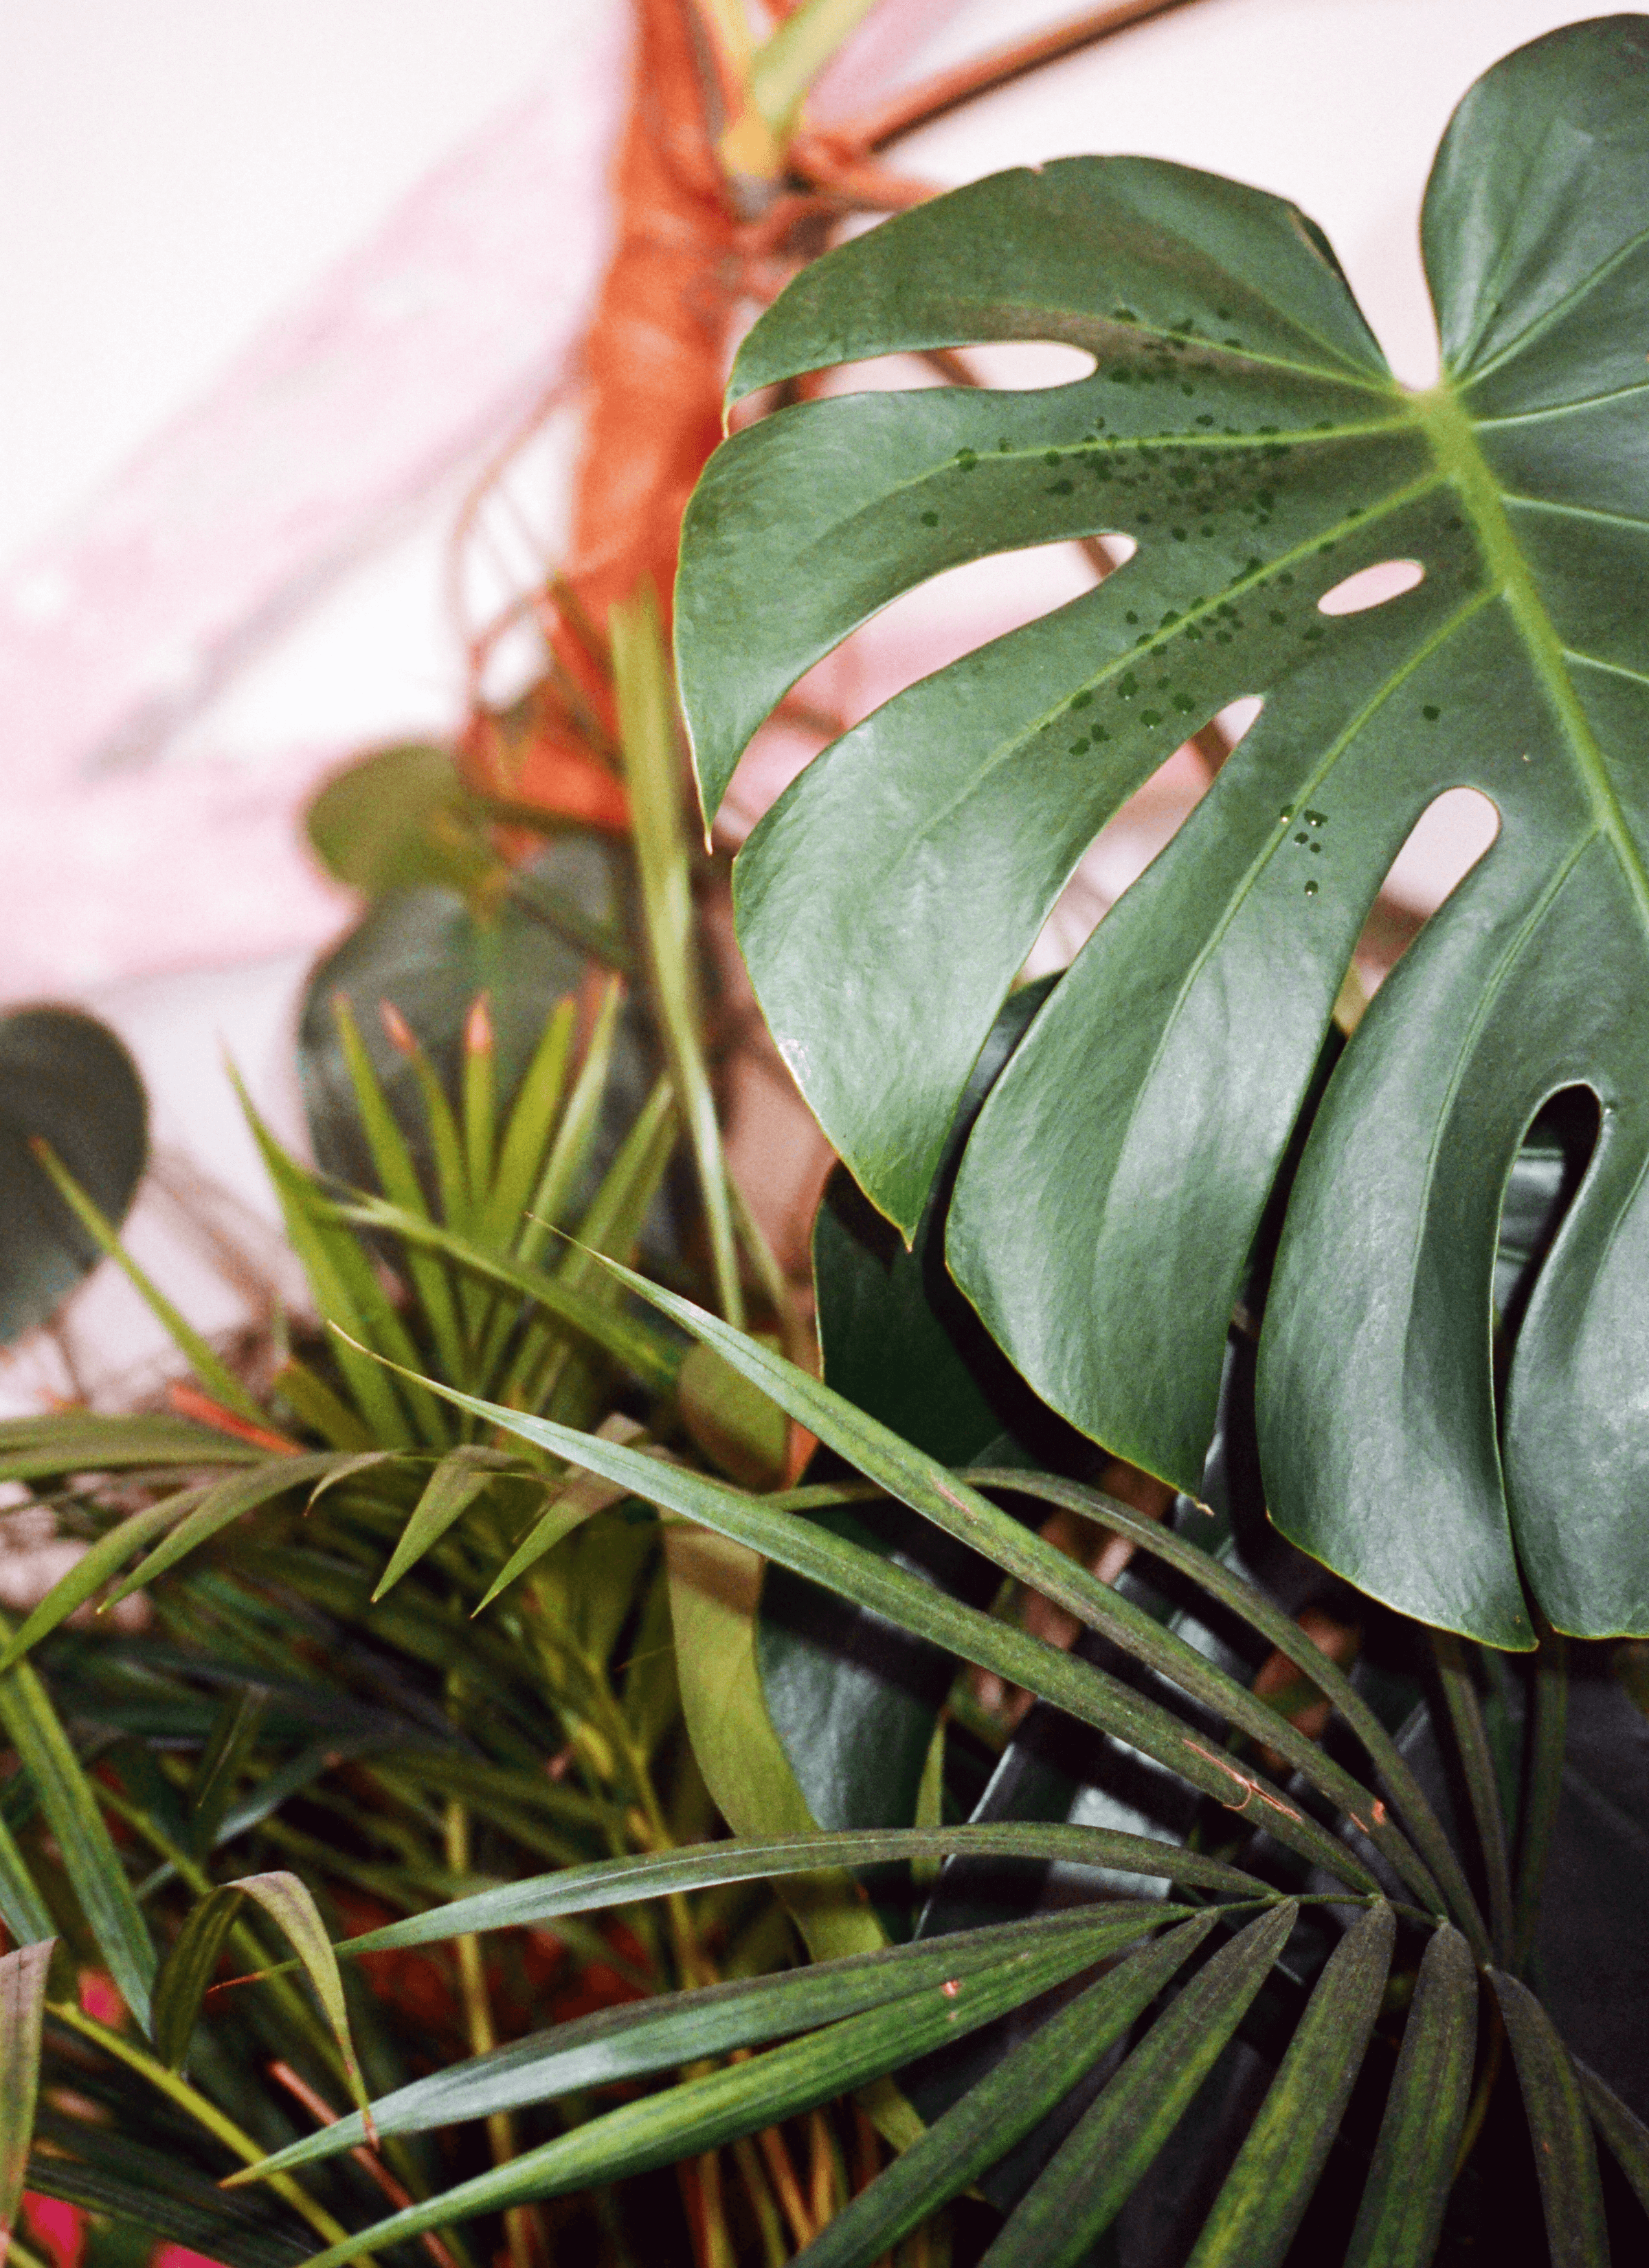 A piece of Monstera leaf and Areca palm leaves.